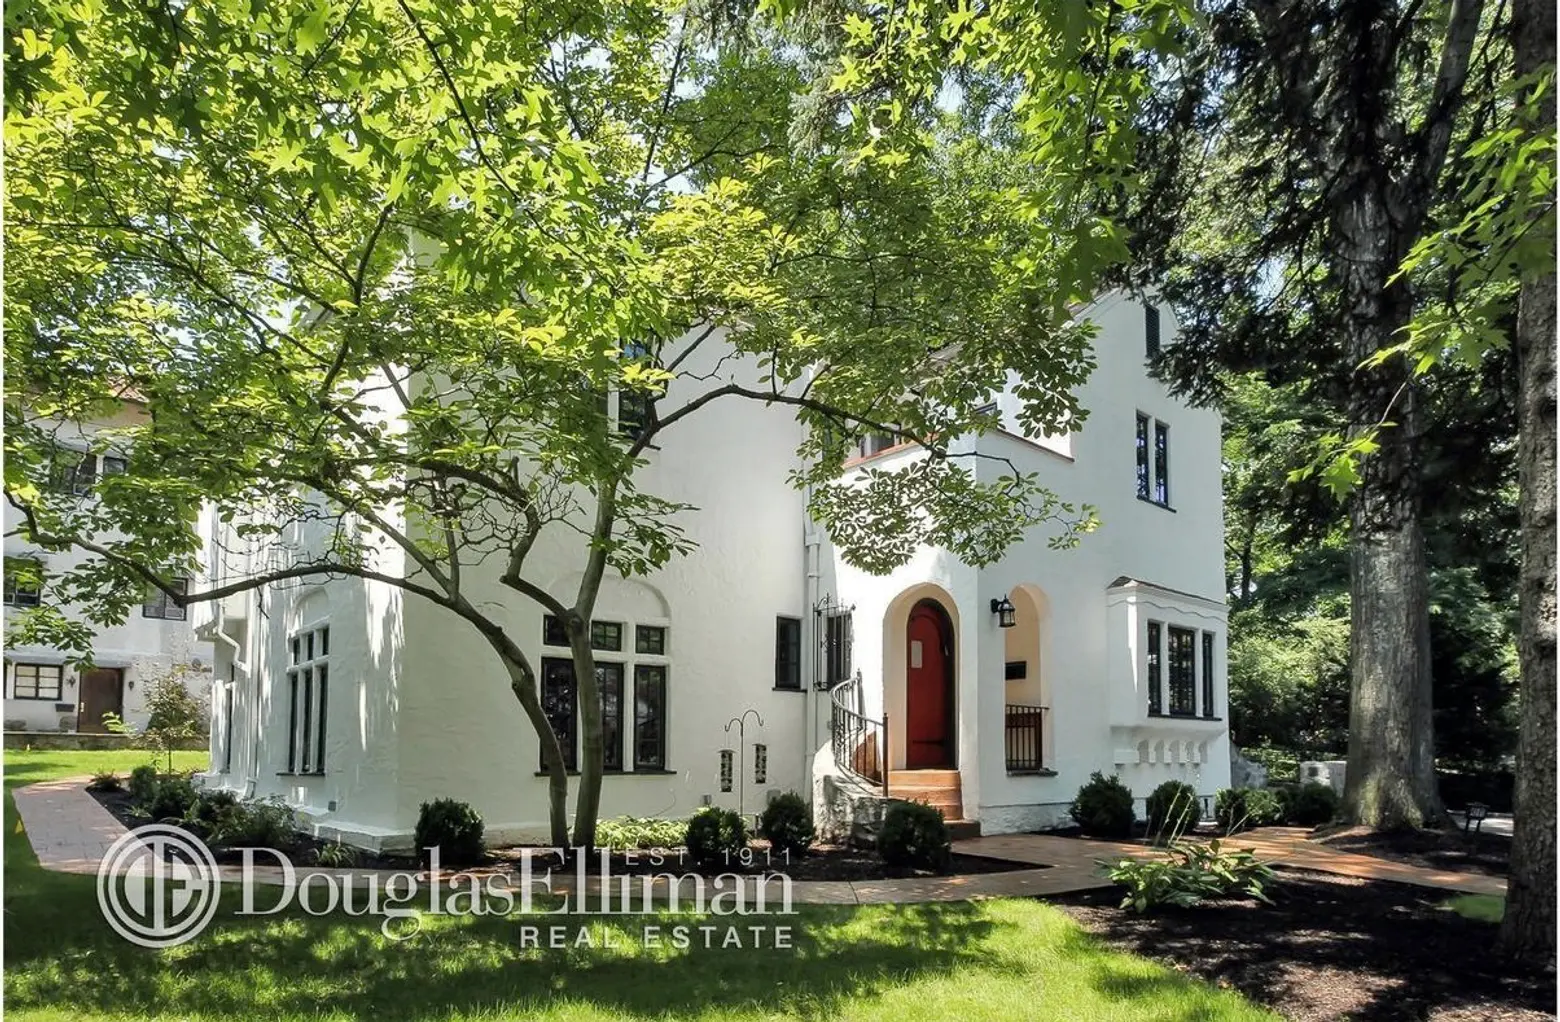 $2.6M Mediterranean-Style Mansion Is Up for Sale in Riverdale